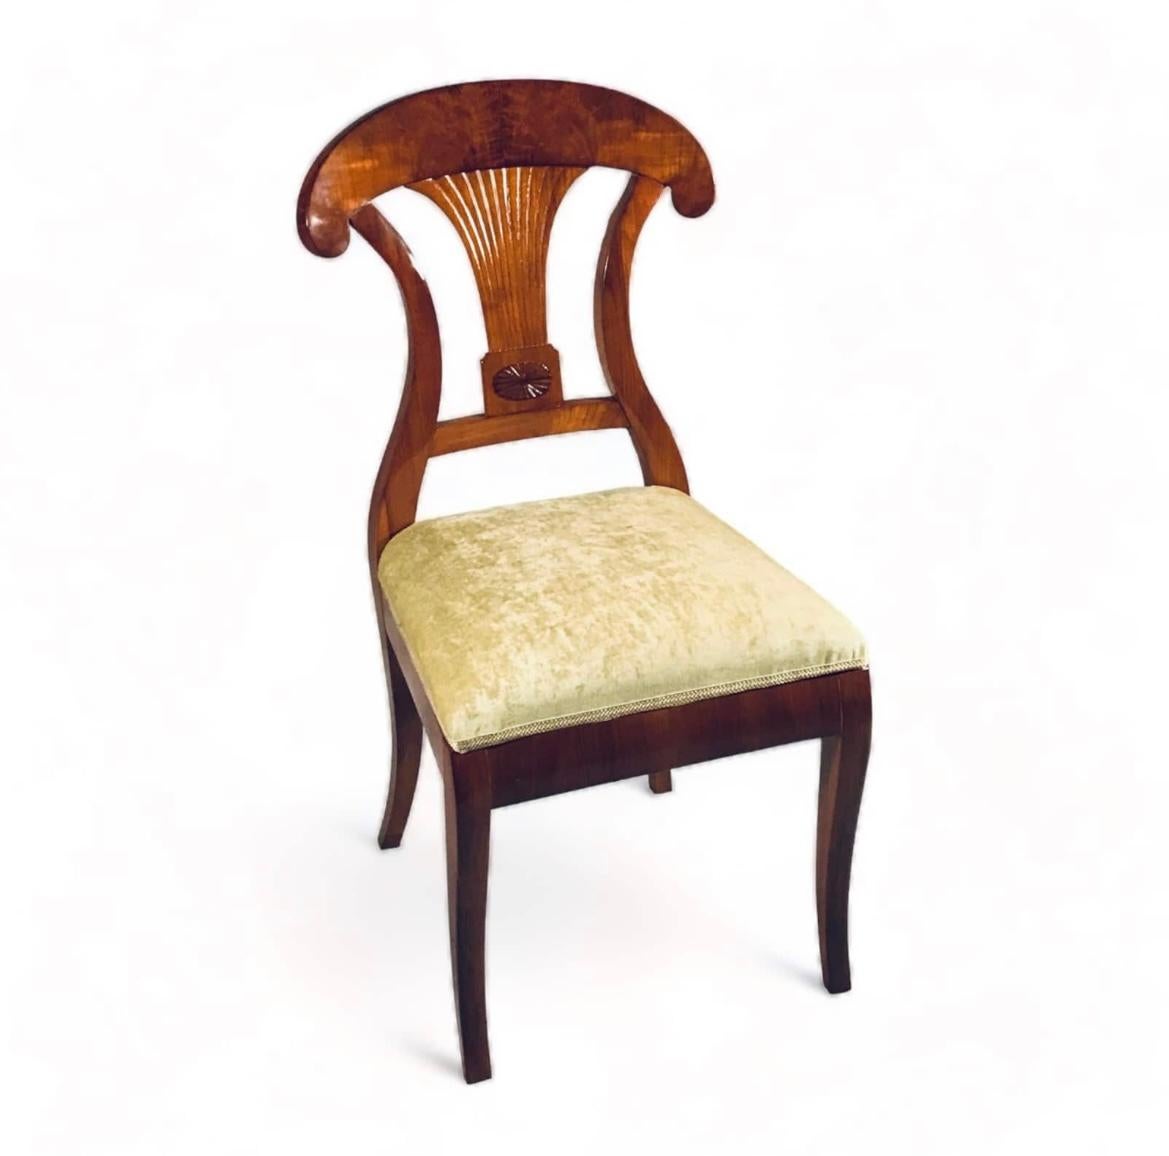 This elegant set of six Biedermeier chairs comes from Southern Germany and dates back to around 1820. The walnut chairs stand out for their exquisite back design, a combination of a shovel back design with a beautifully shaped fan decor in the